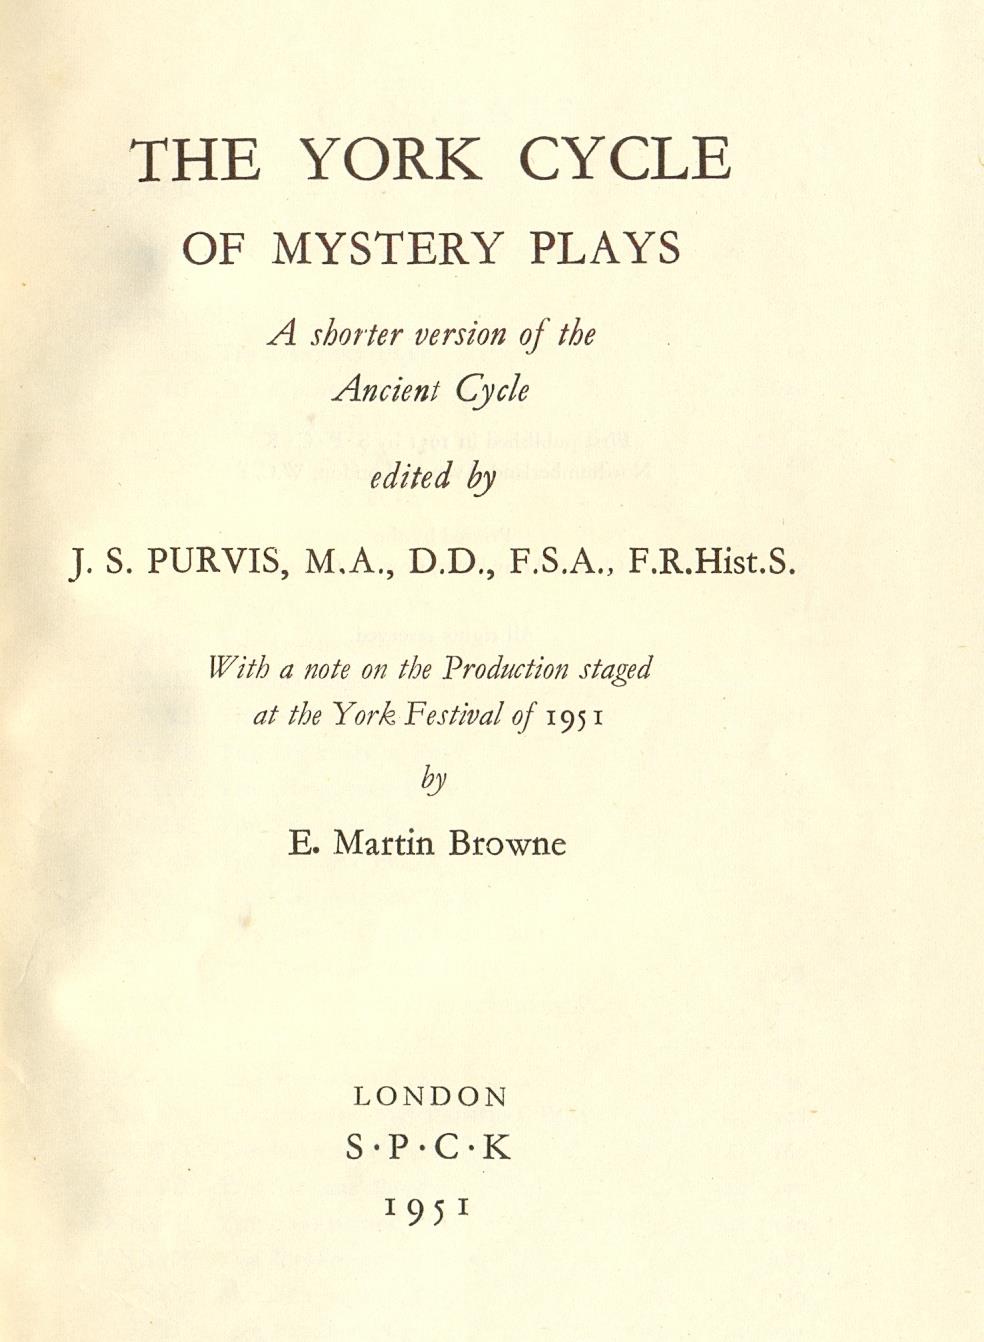 1951 title page